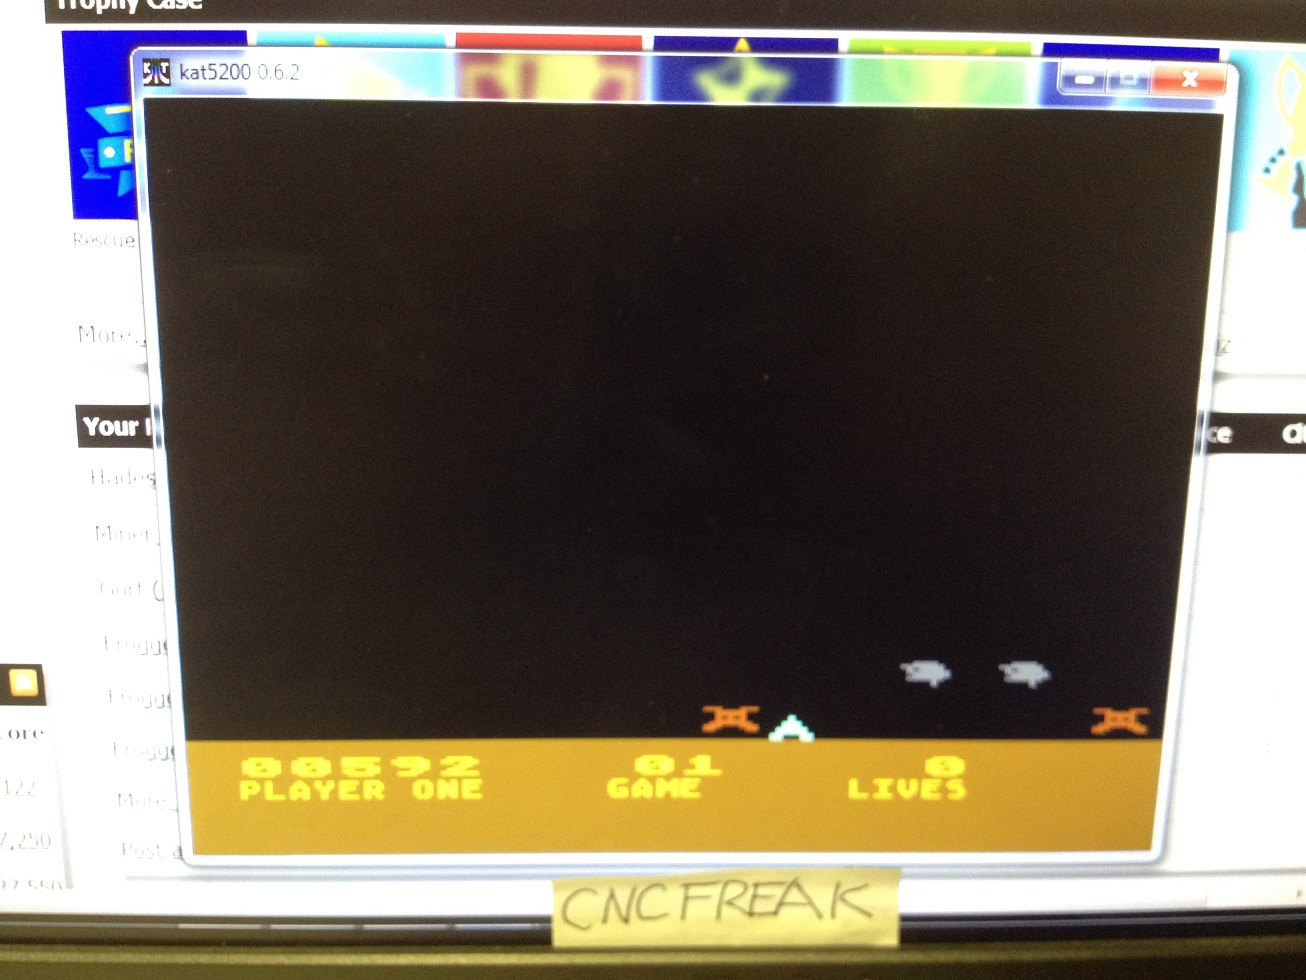 cncfreak: Space Invaders: Game 1 (Atari 5200 Emulated) 592 points on 2013-10-15 10:30:12